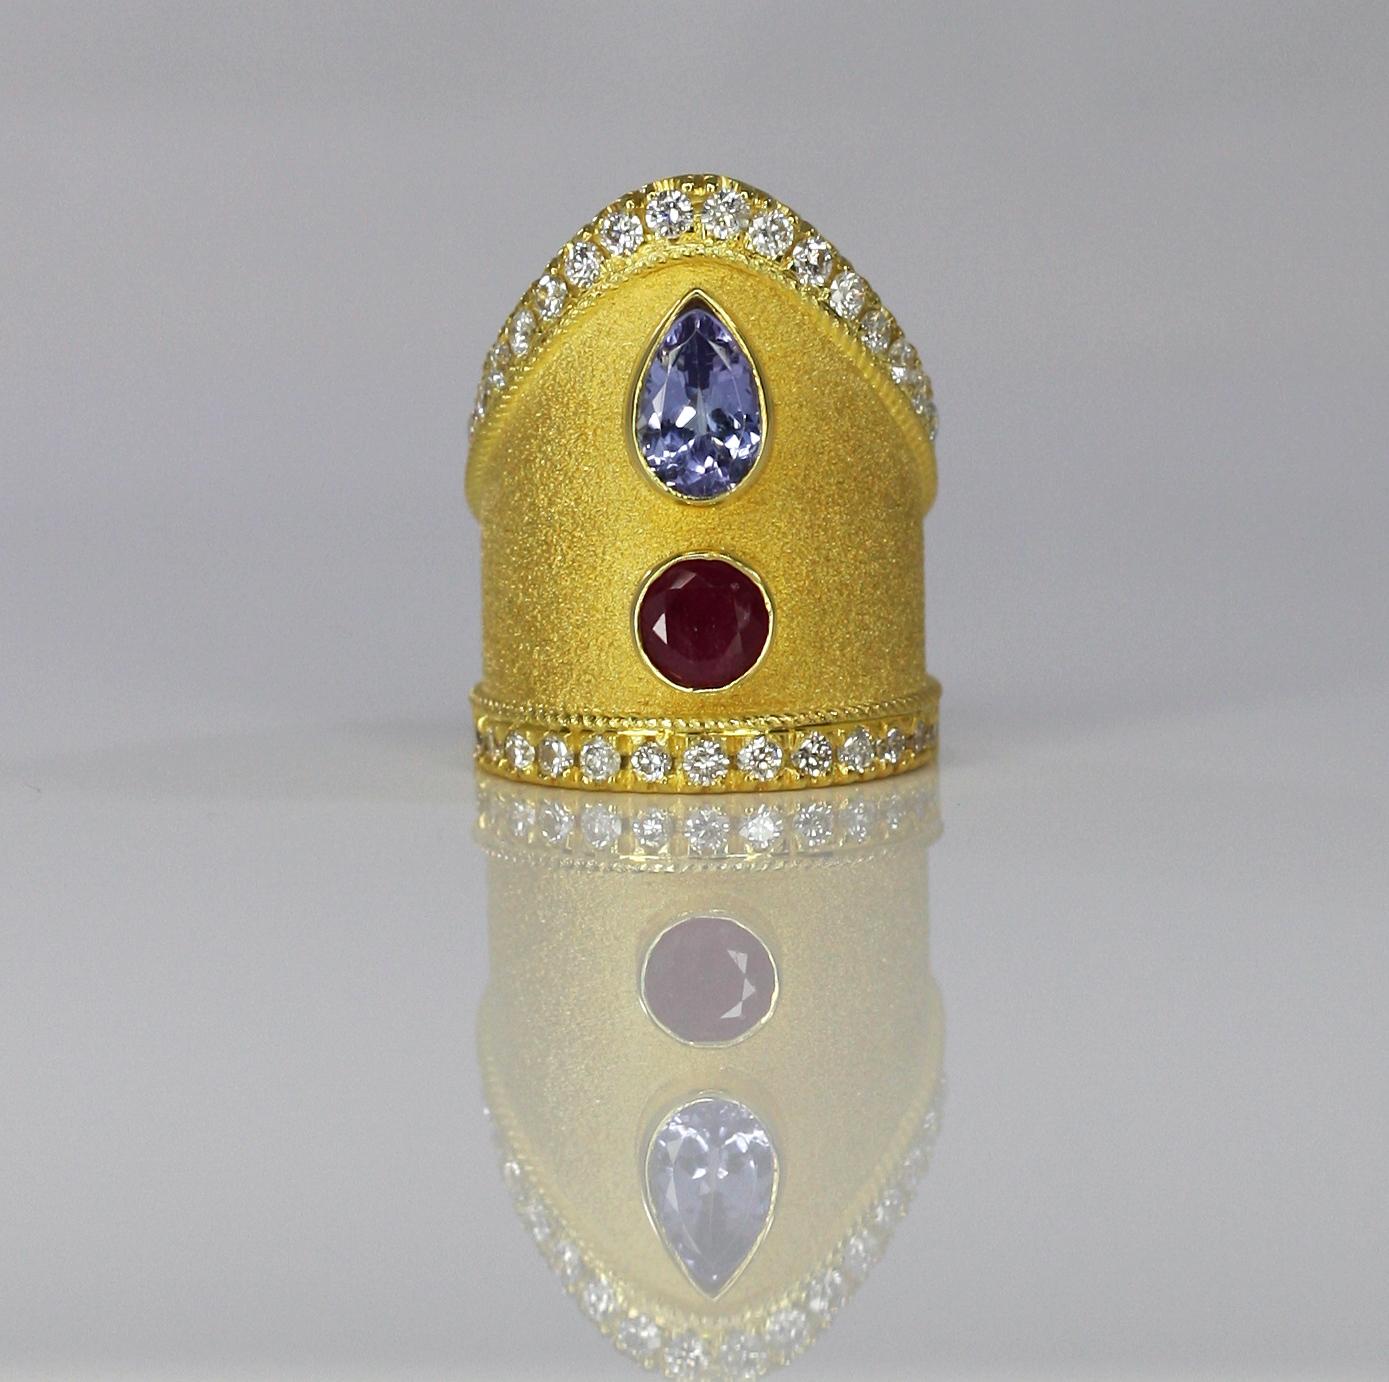 S.Georgios designer 18 Karat Yellow Gold Ring all handmade with the Byzantine workmanship and the unique velvet look on the background. The ring has rims decorated with White Diamonds total weight of 1.10 Carat and the center features 1.65 Carat